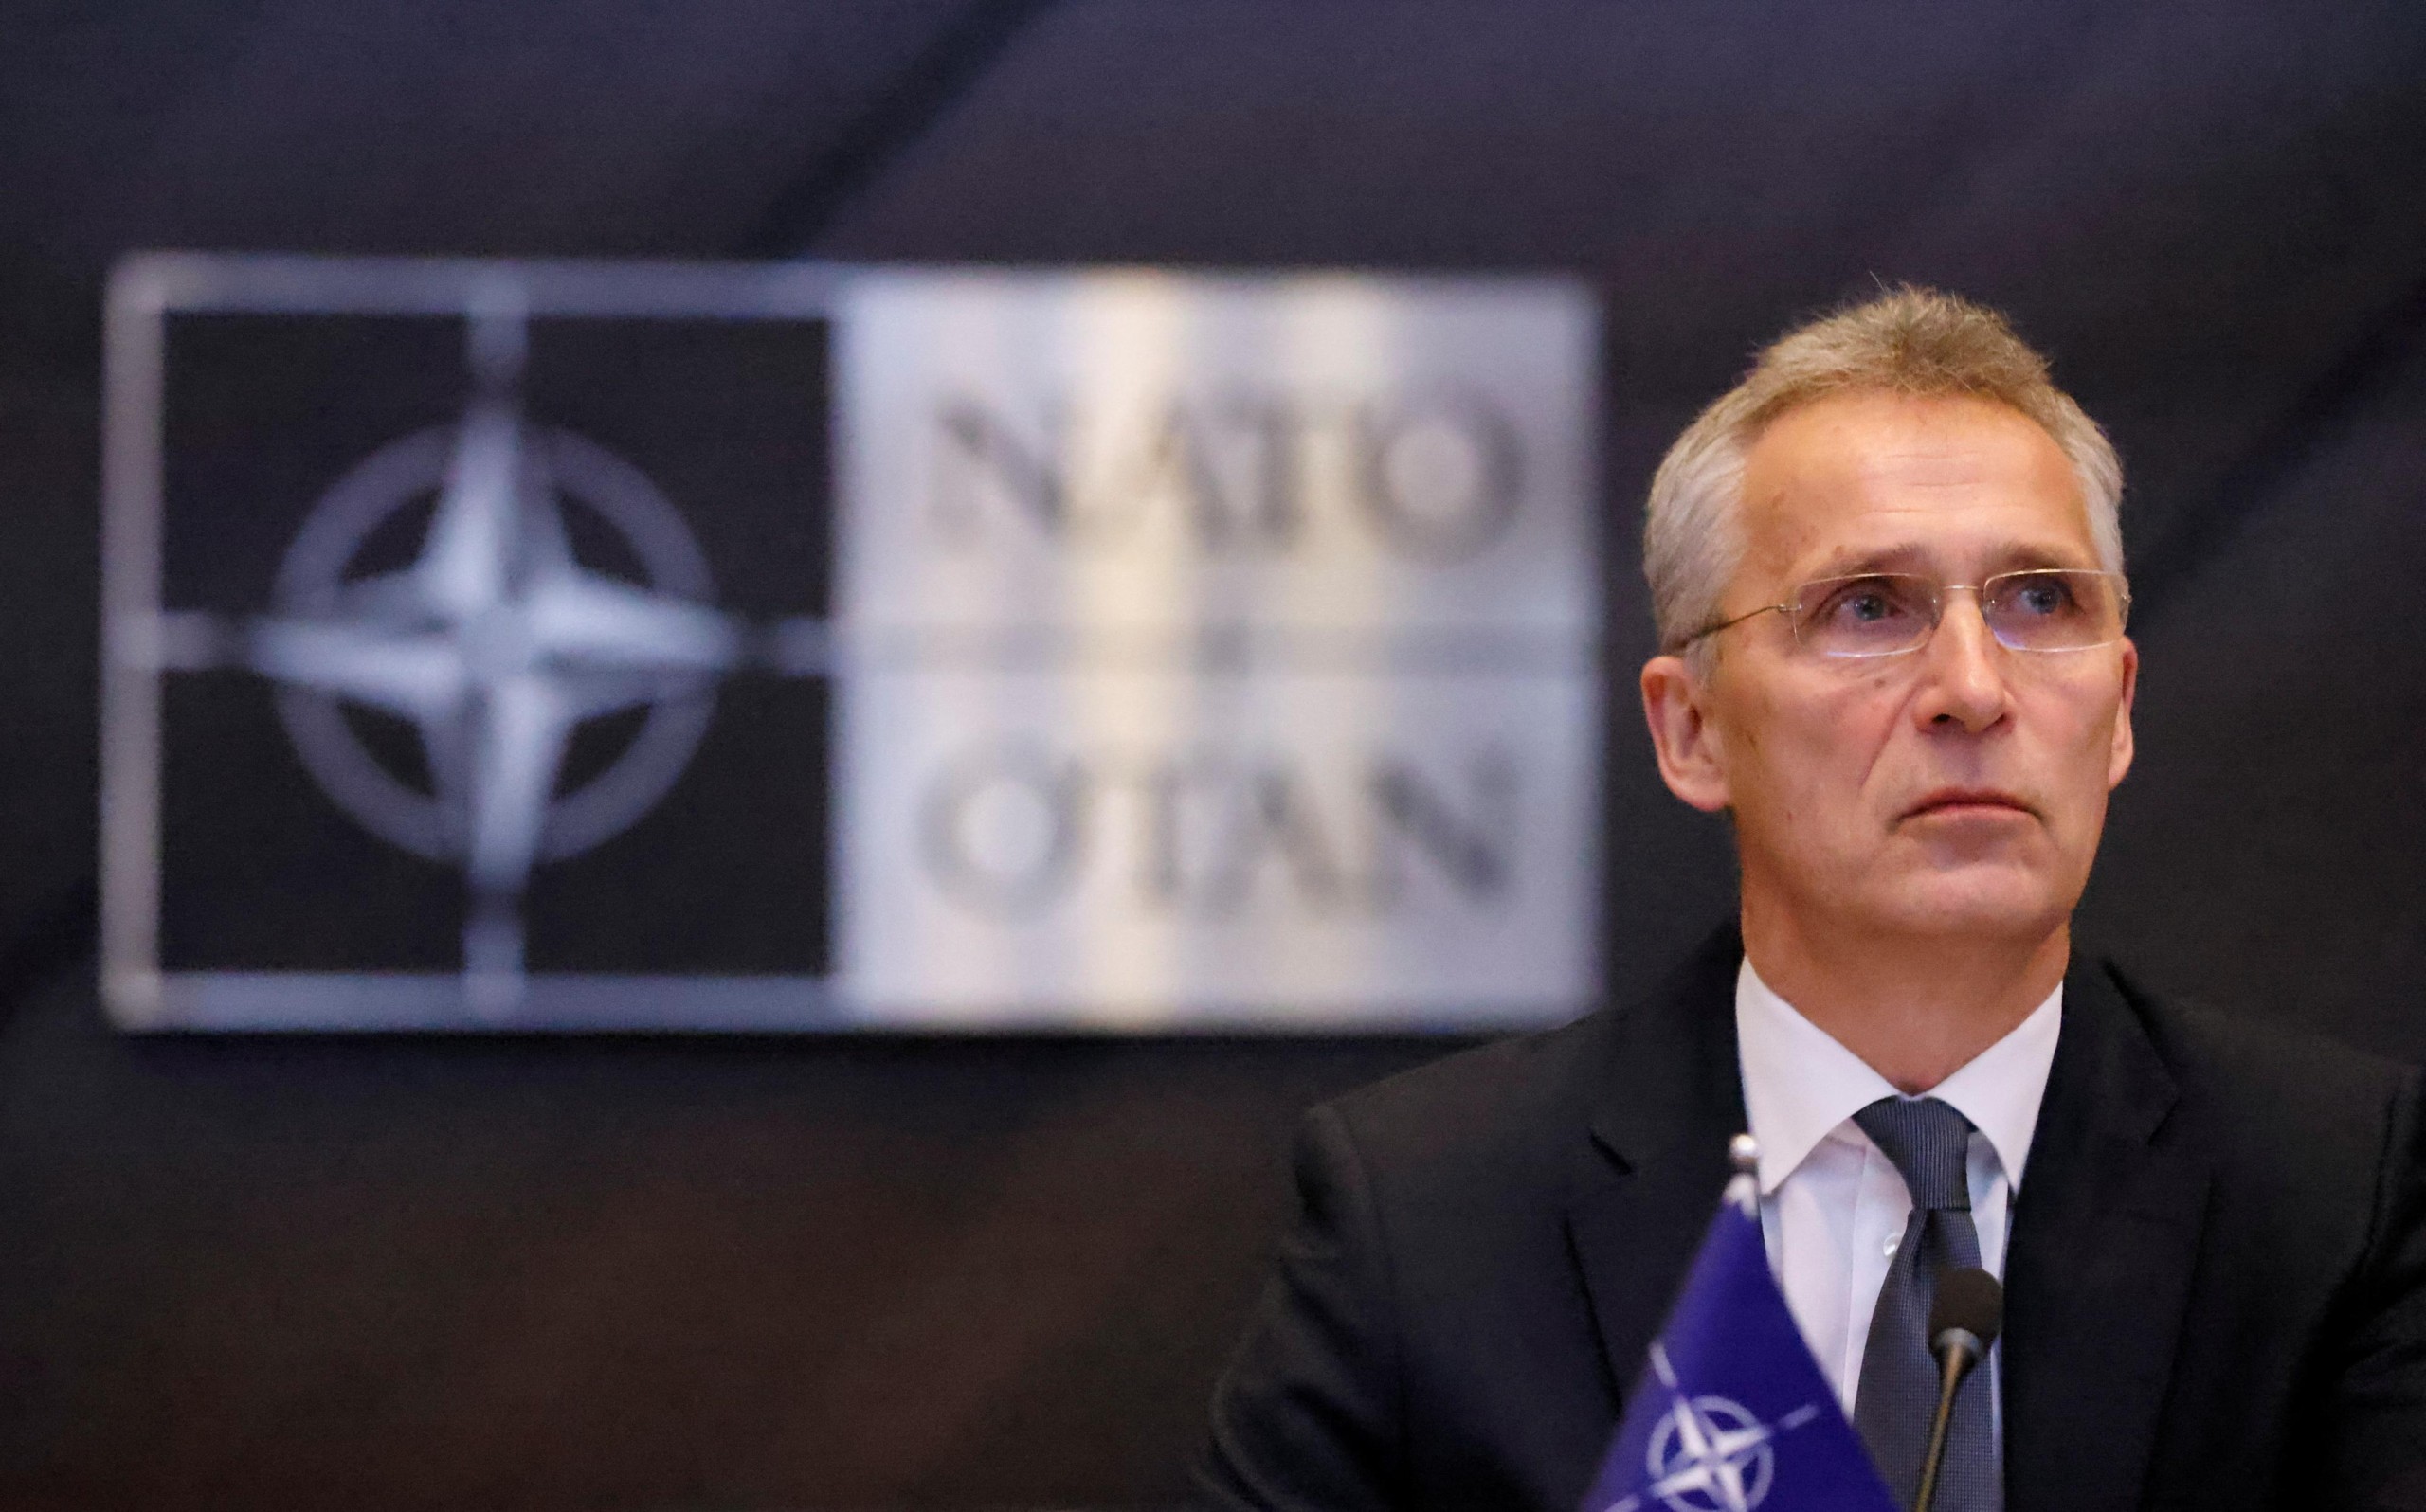 NATO Secretary-General Jens Stoltenberg attends meeting of NATO Defence Ministers in Brussels, Belgium, March 16, 2022. REUTERS/Johanna Geron Photo: JOHANNA GERON/REUTERS